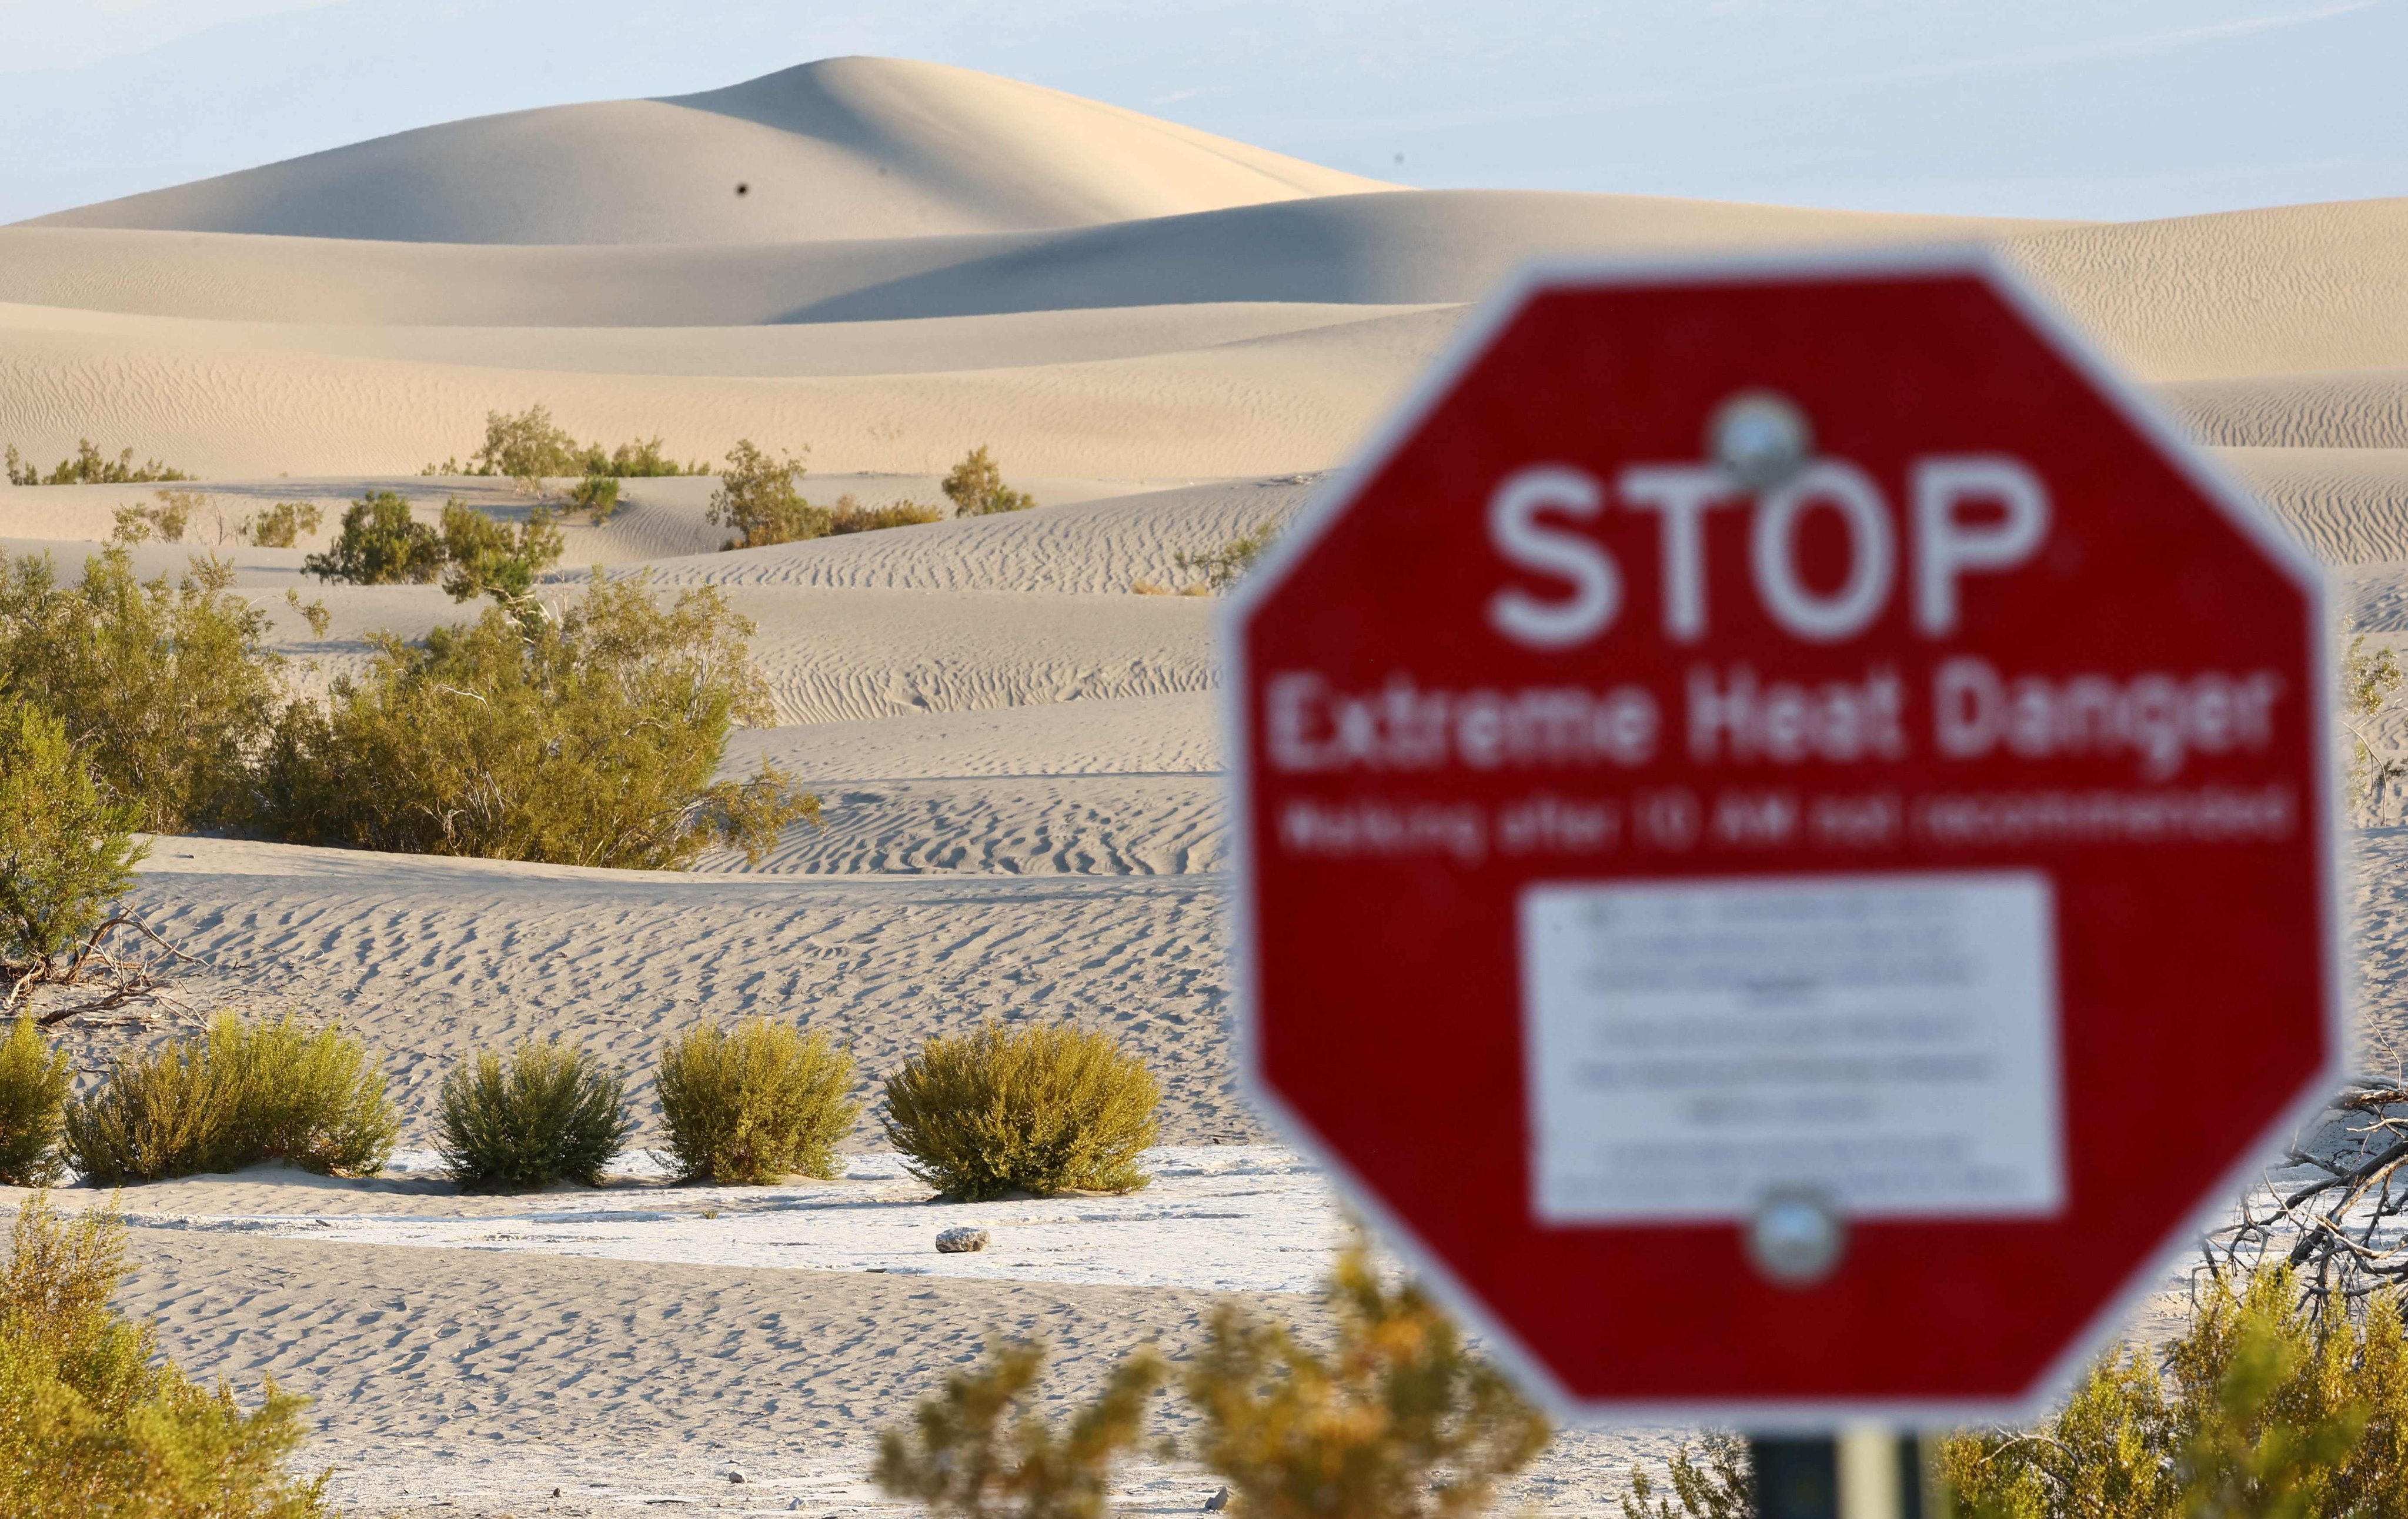 A ‘Stop, Extreme Heat Danger’ sign stands at Mesquite Flat Sand Dunes during a heat wave in Death Valley National Park, California, on July 9. Photo: AFP